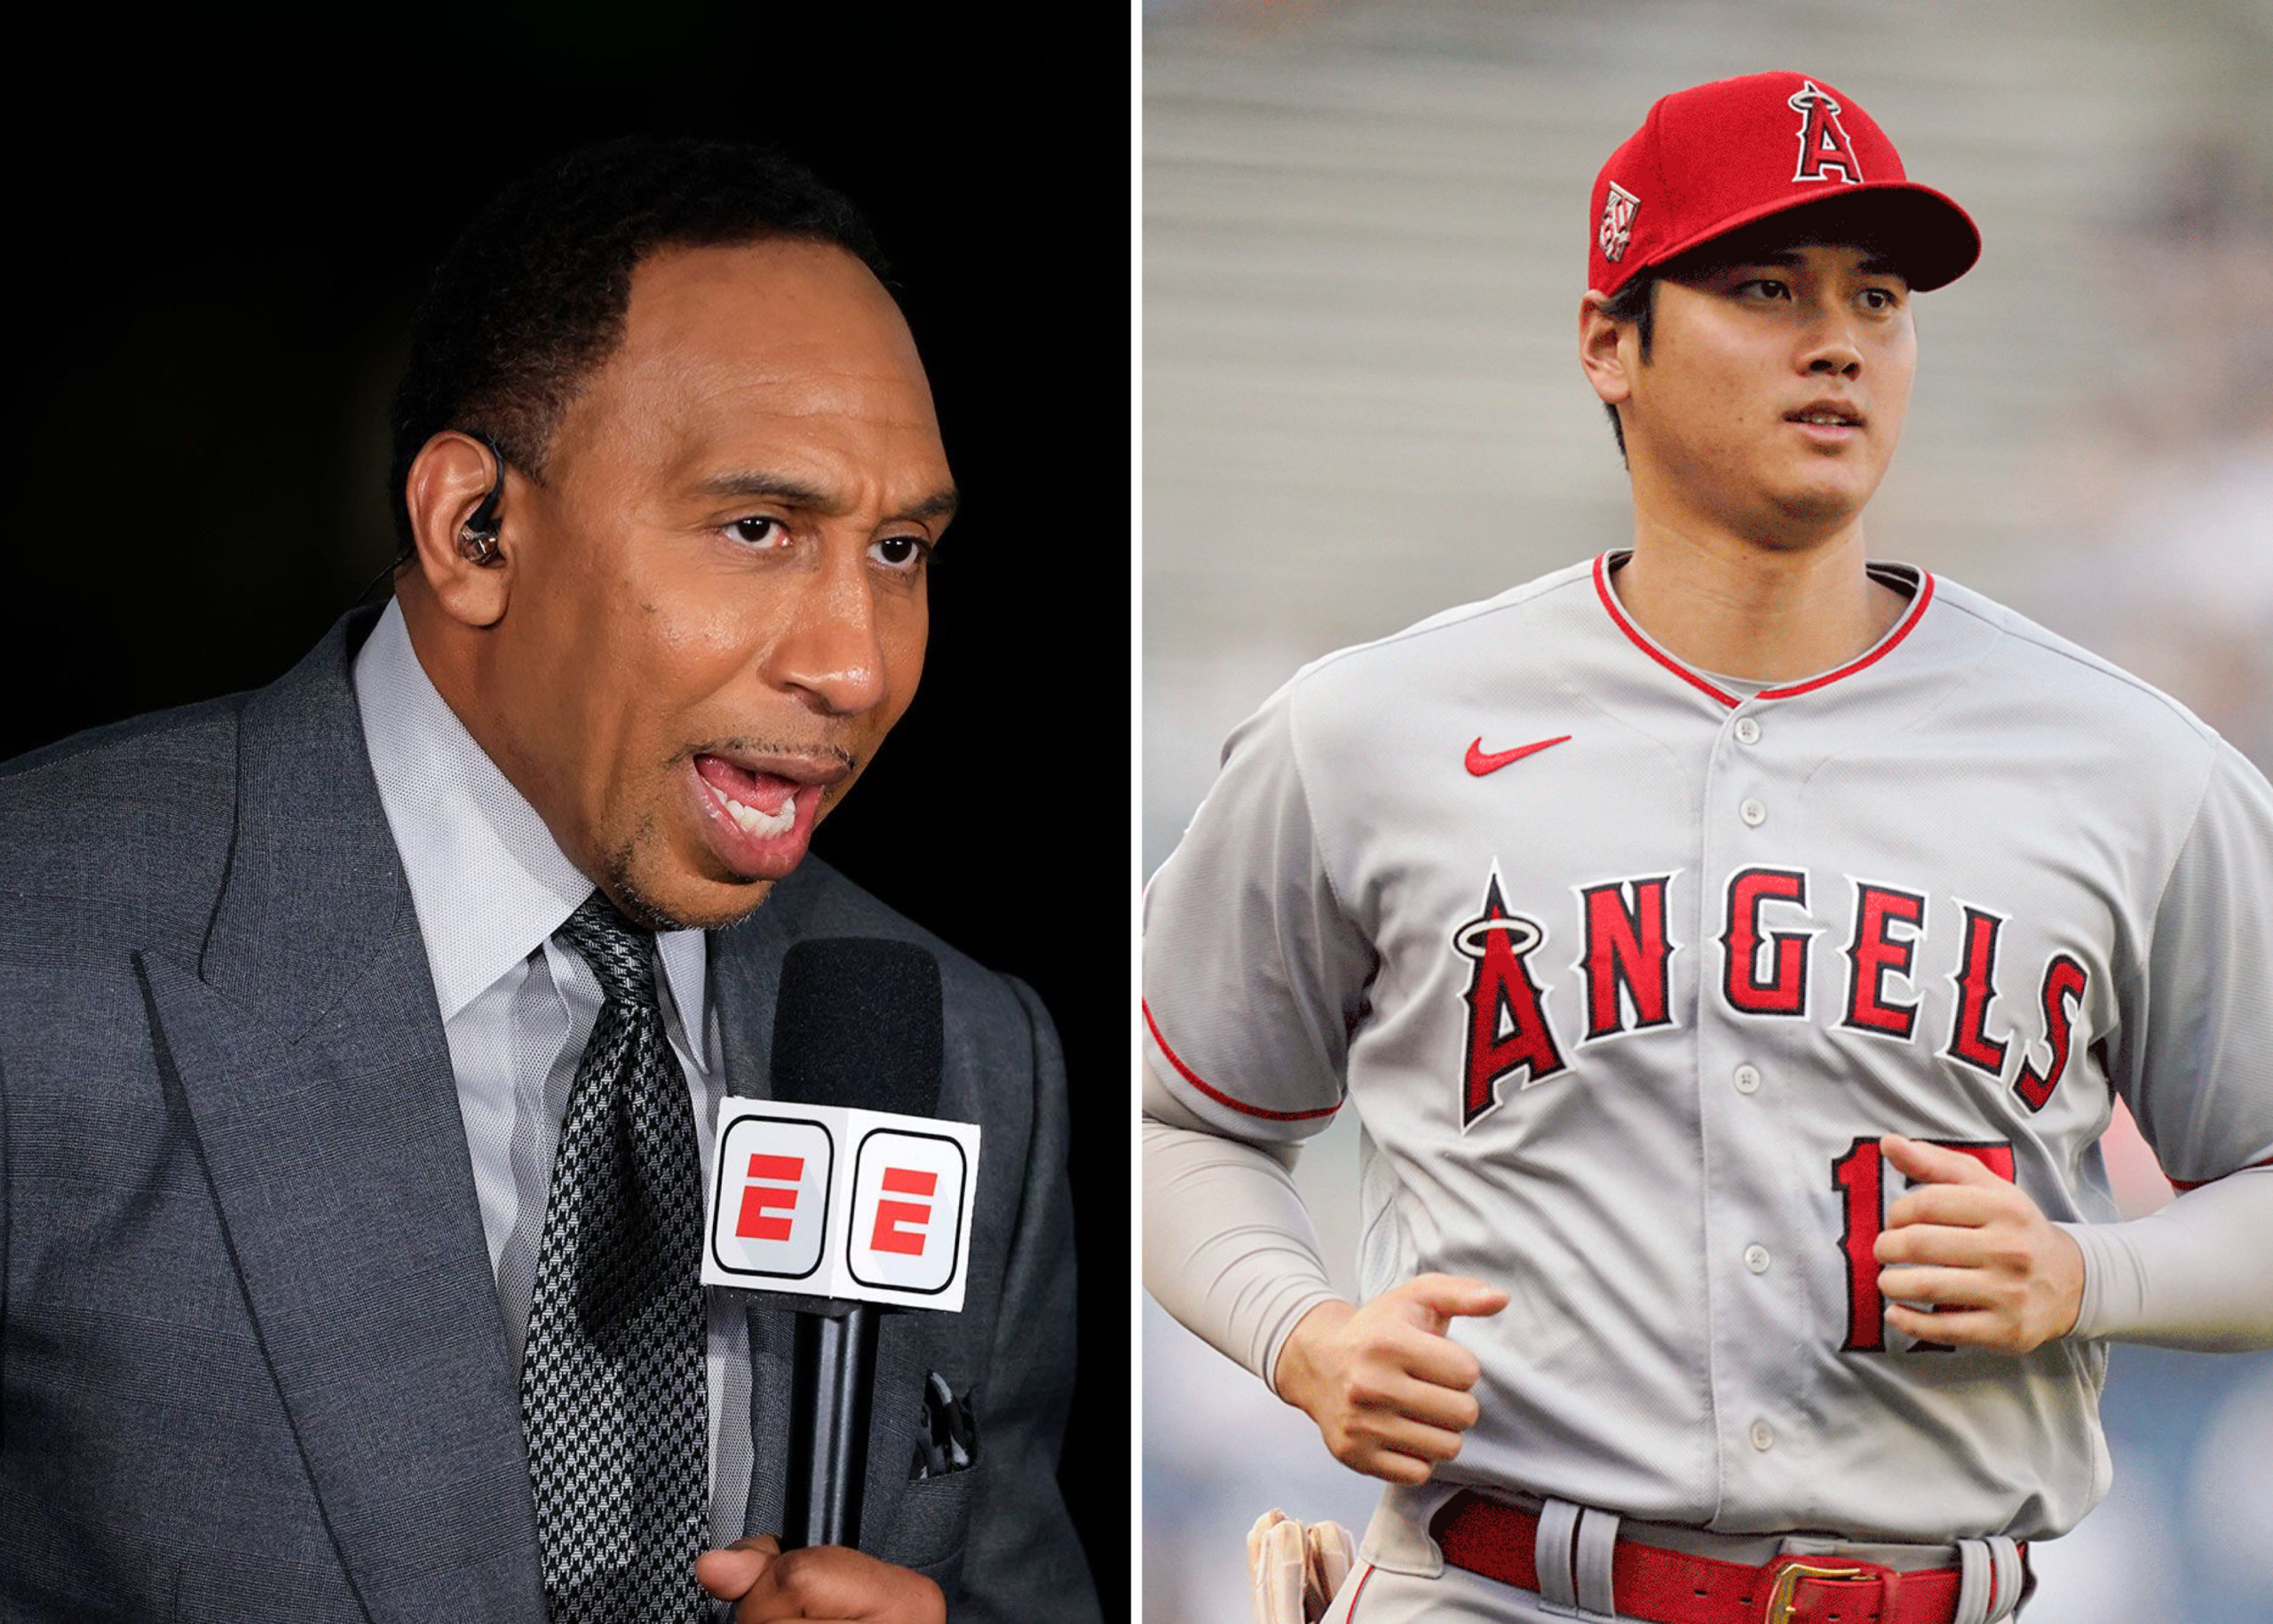 US Sport Commentator, Stephen A. Smith Apologises For Insensitive Comments About Japanese Baseball Player, Shohei Ohtani